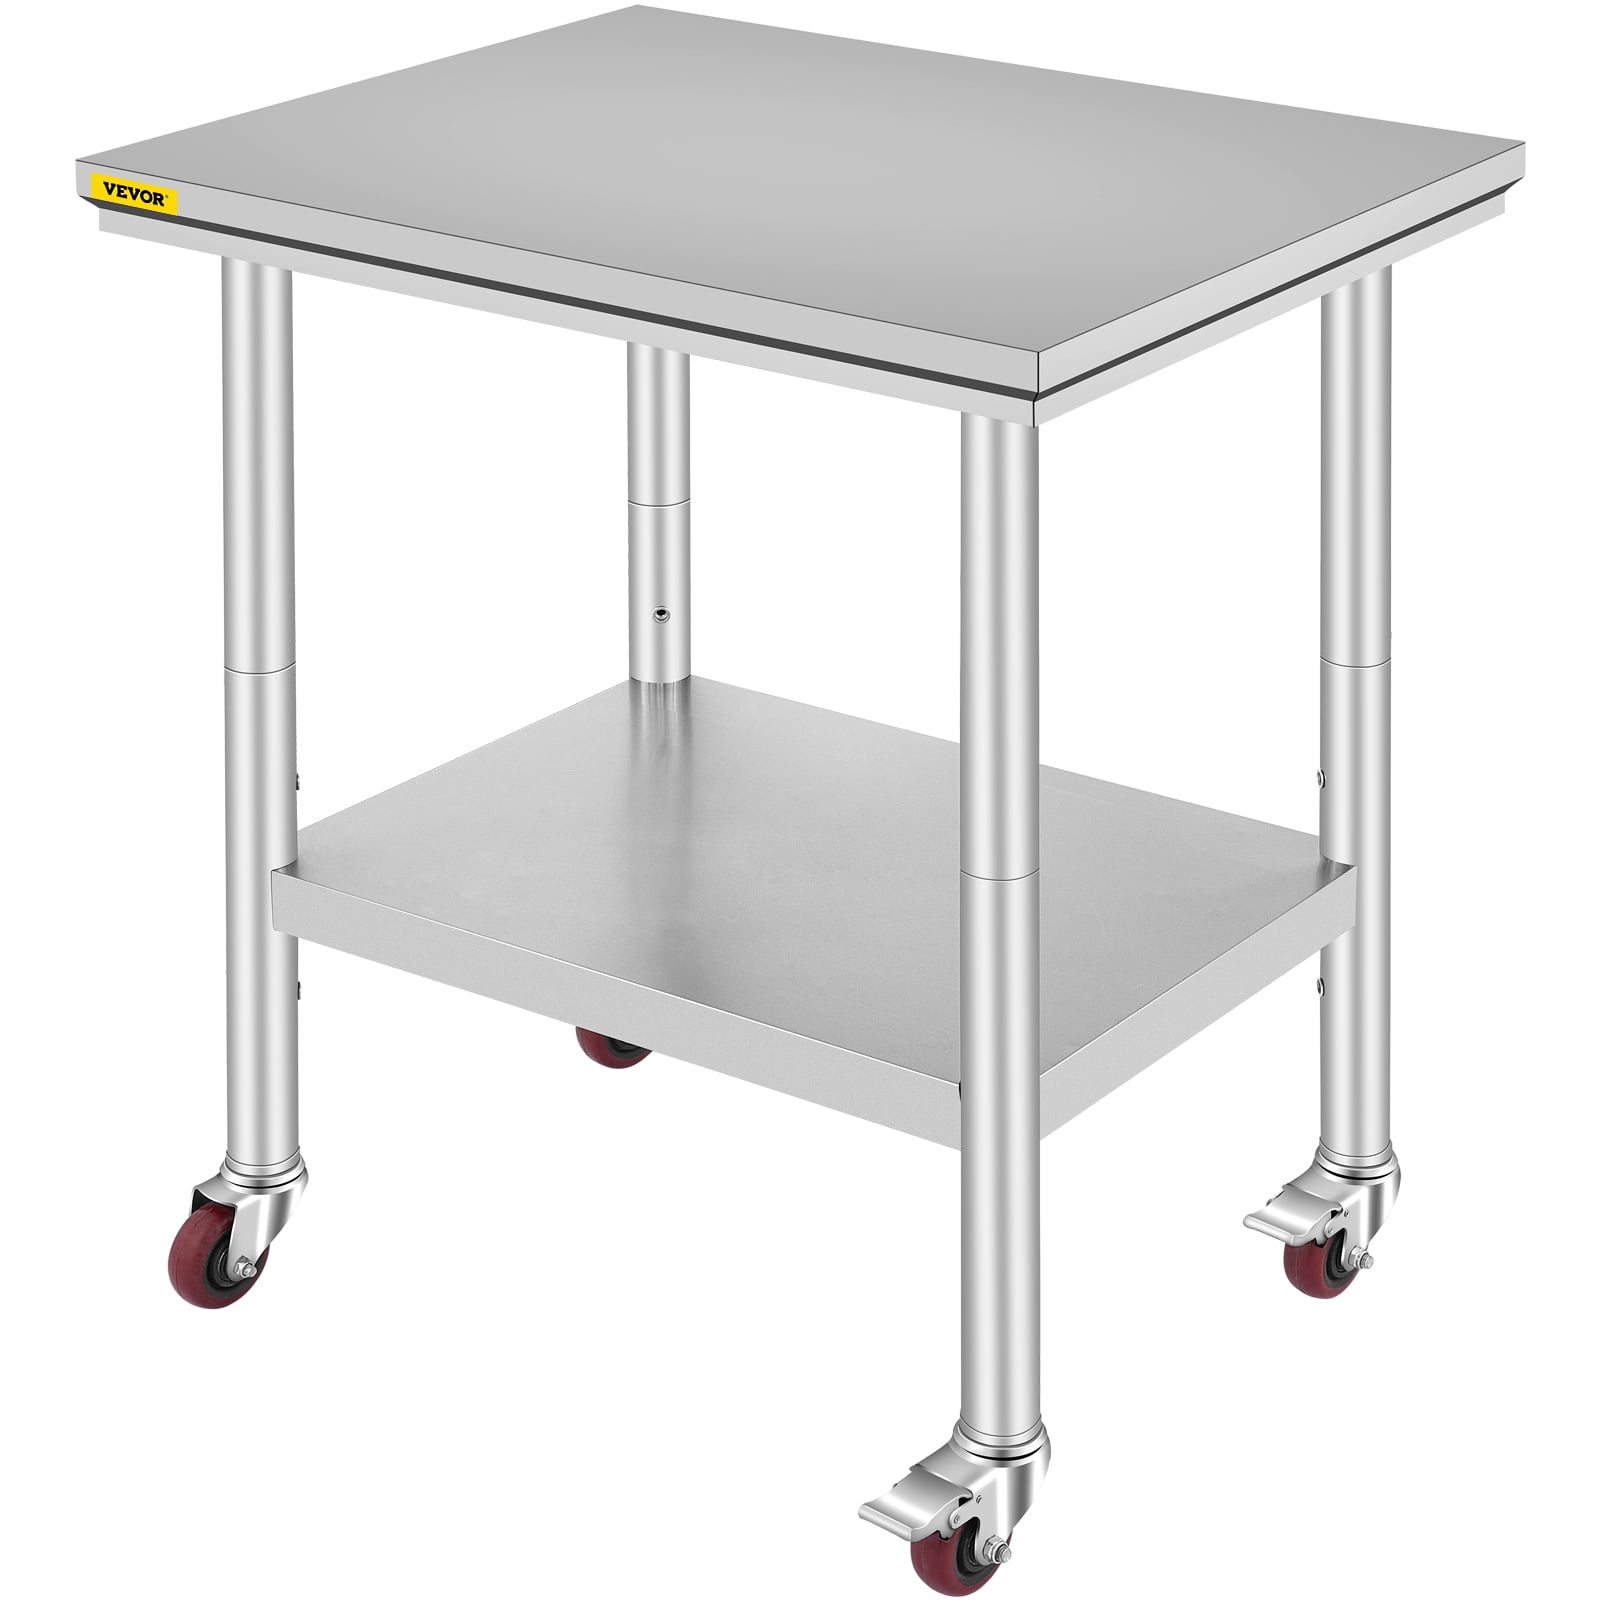 Stainless Steel Kitchen Work Table Catering Bench Top Overshelf Set with 2 Layer 